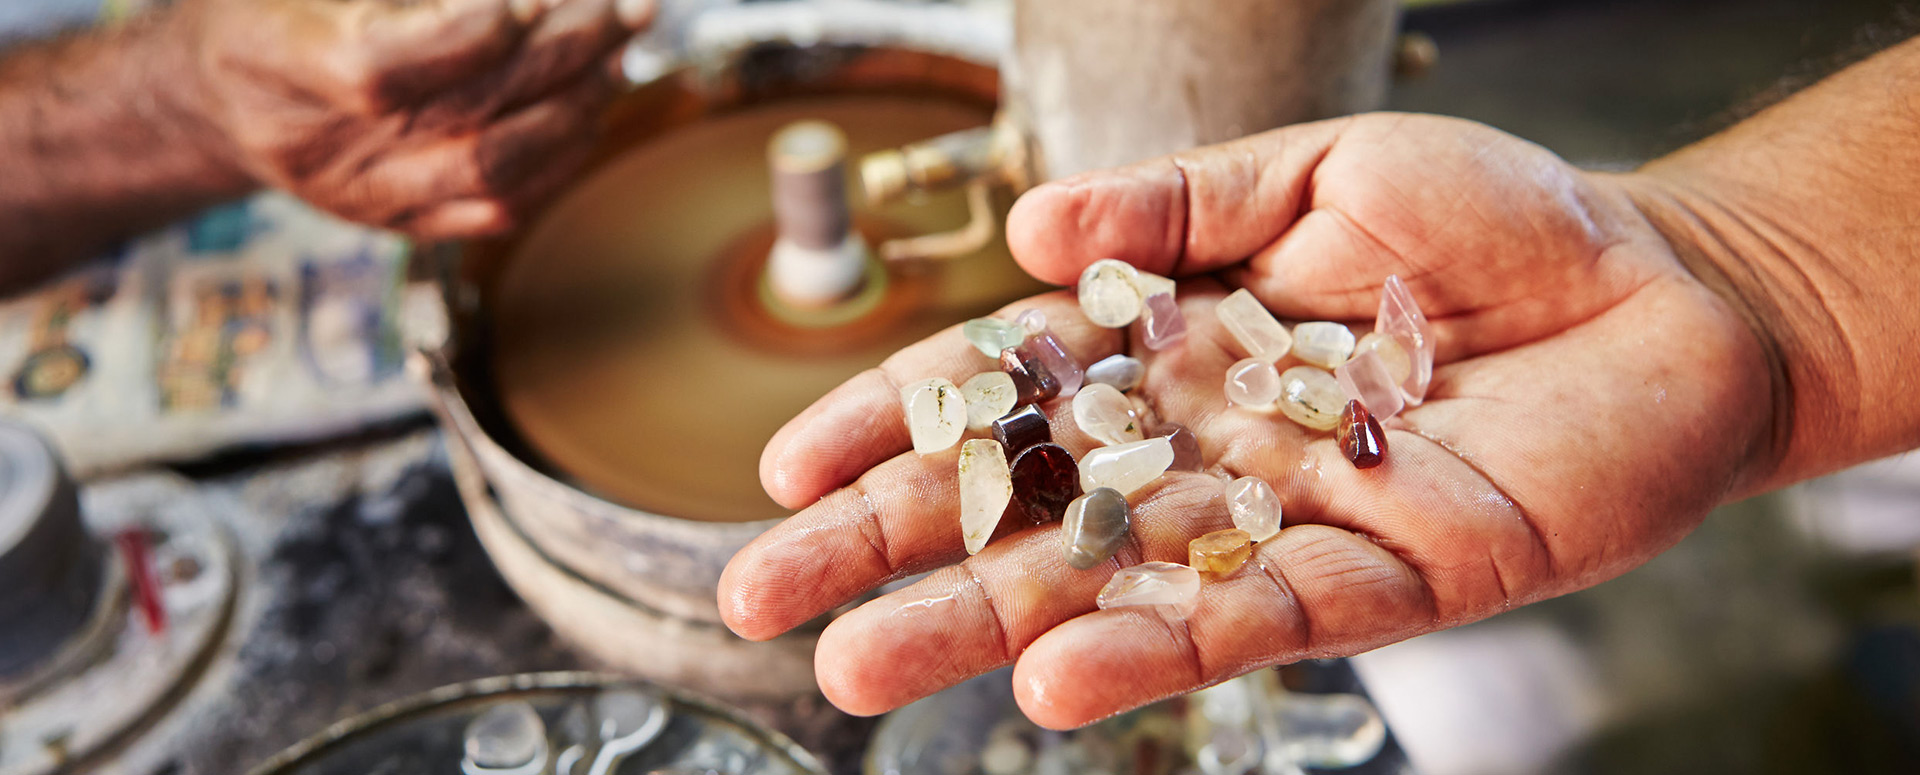 Uncut gem stones in the palms of a miner